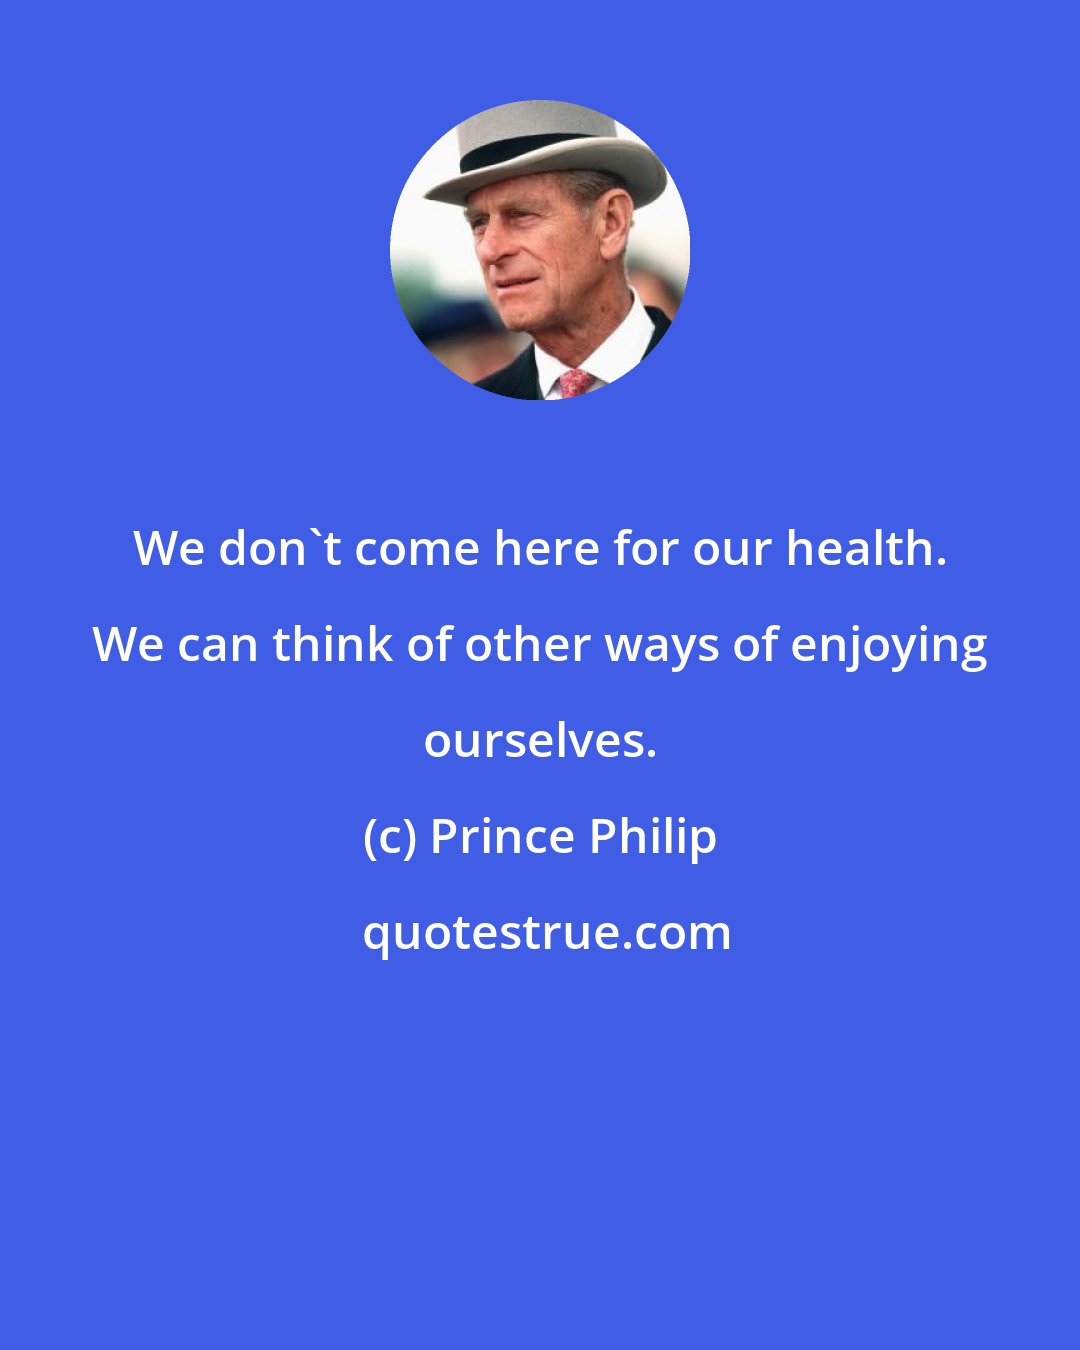 Prince Philip: We don't come here for our health. We can think of other ways of enjoying ourselves.